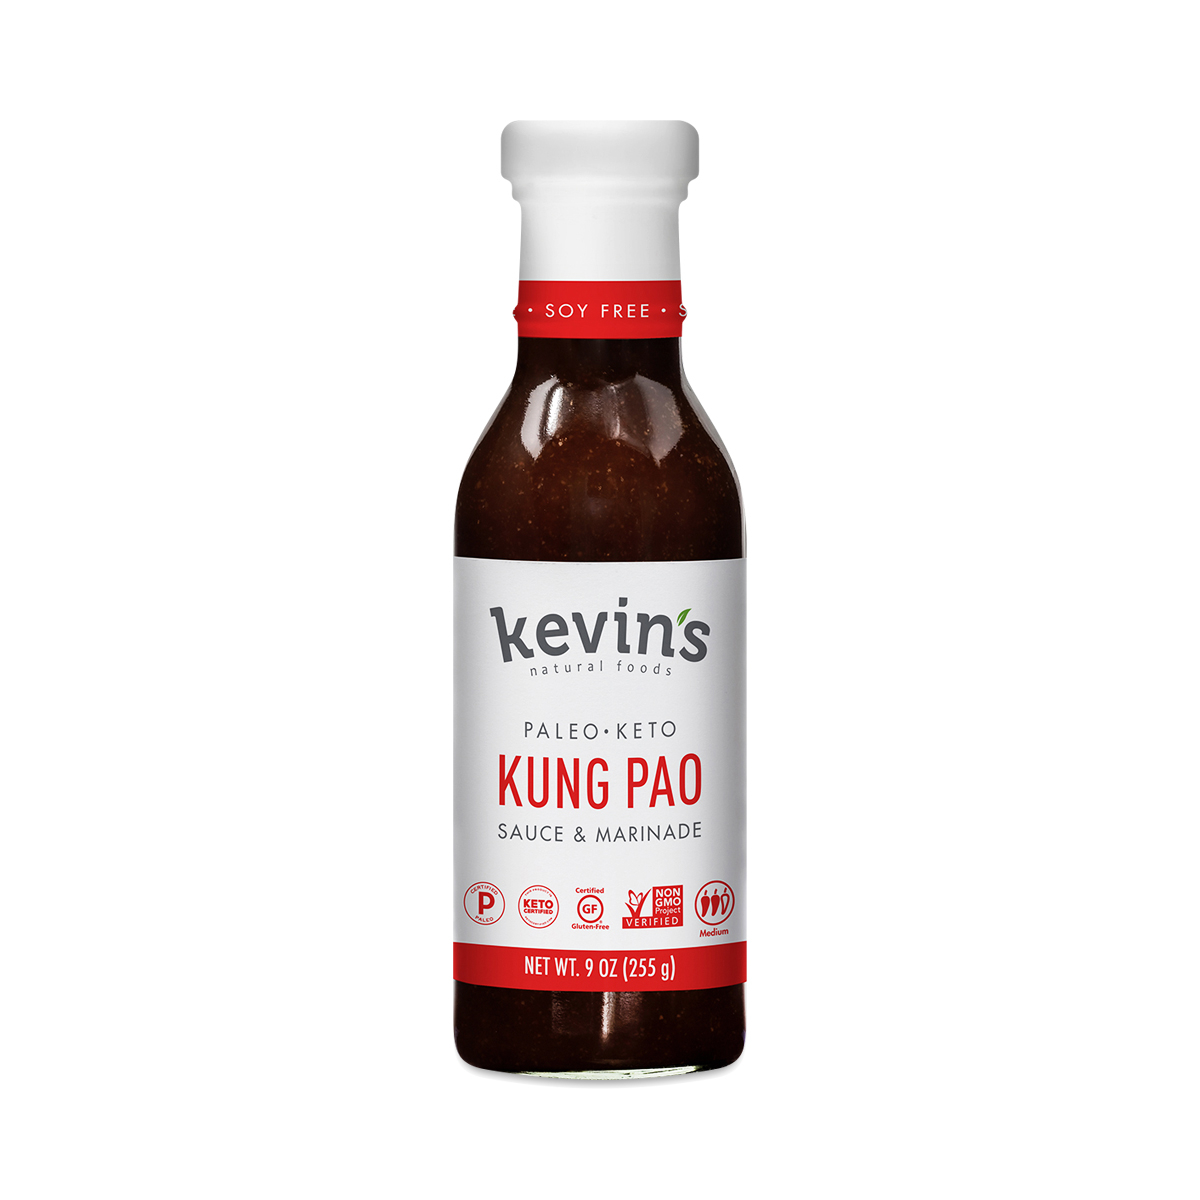 Kevin's Natural Foods Kung Pao Sauce & Marinade 9 oz pouch